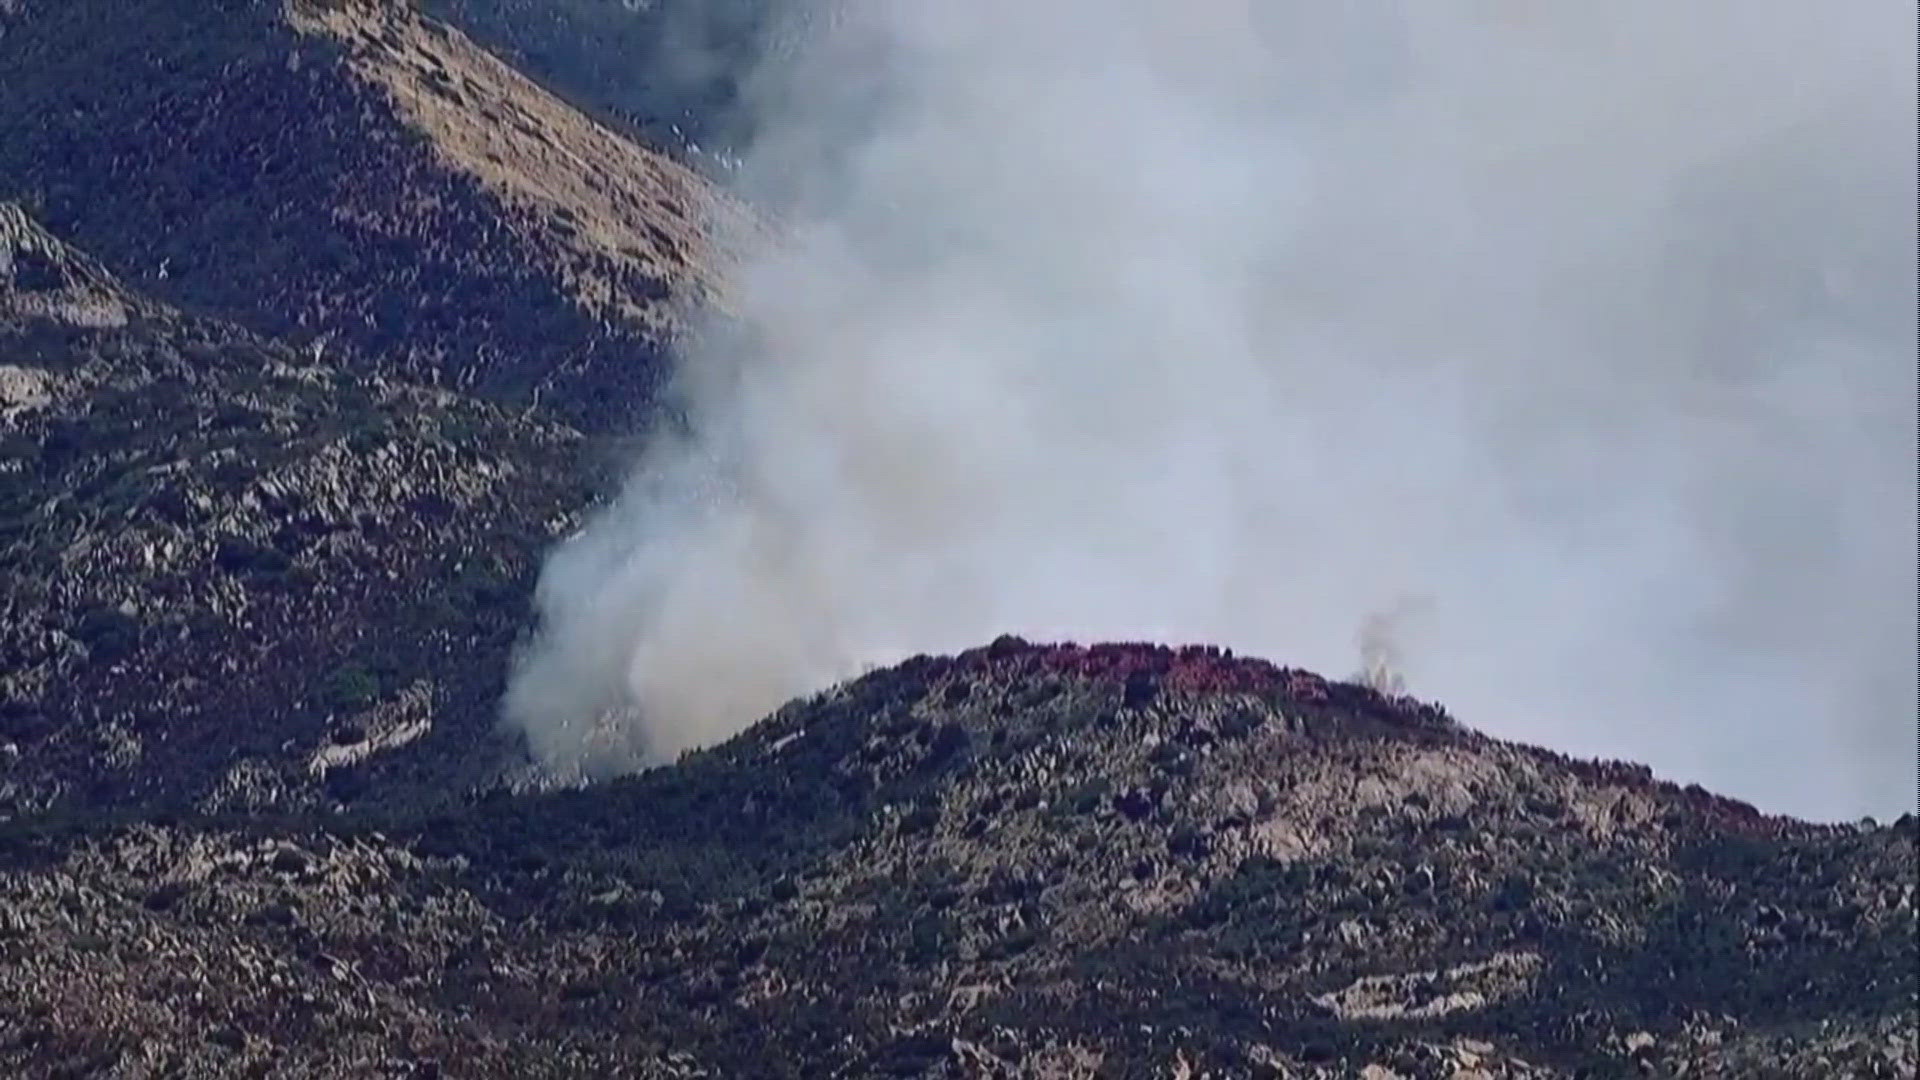 The fire was 25 acres as of around 11:40 a.m. Monday, according to Cleveland National Forest.